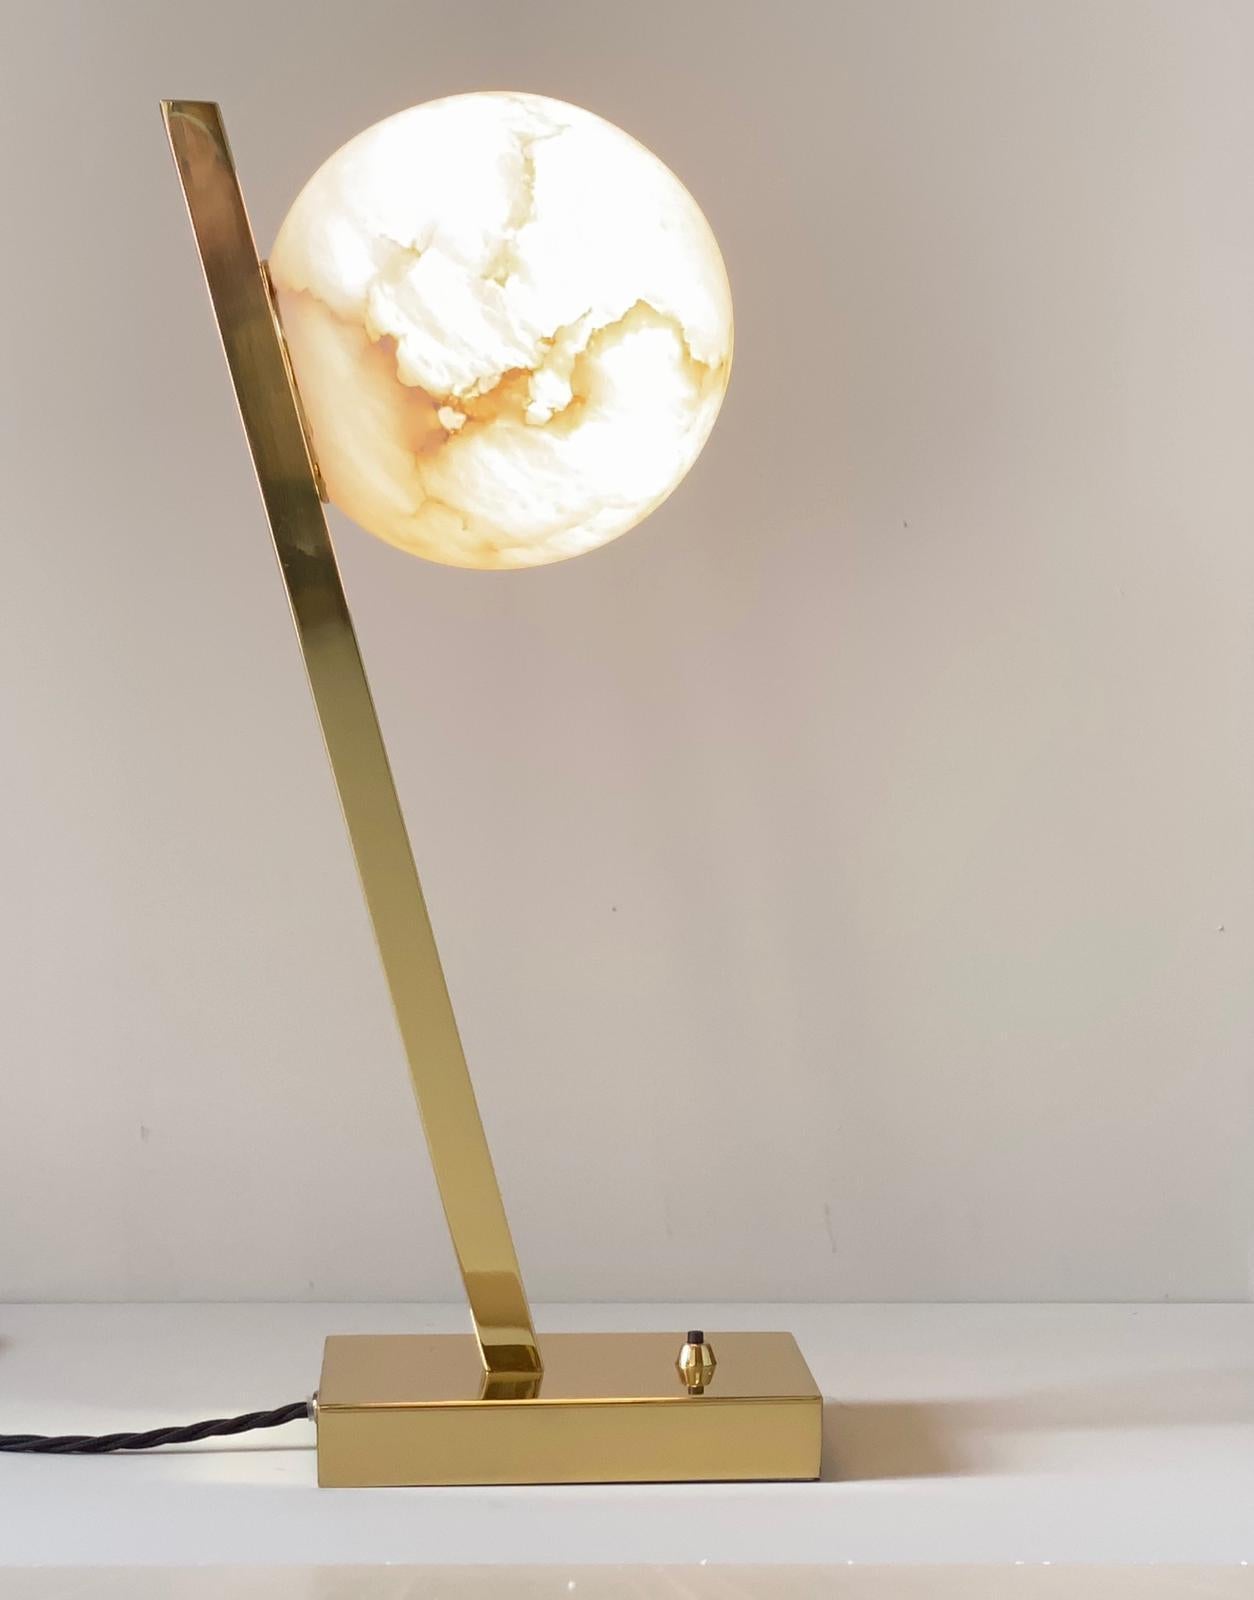 Cosulich Interiors & Antiques in collaboration with Matlight: a couture table lamp, entirely hand made in Milan (Italy) that speaks about full moons in mid summer nights, with sleek minimalist design that allows the magic of the backlighted veined